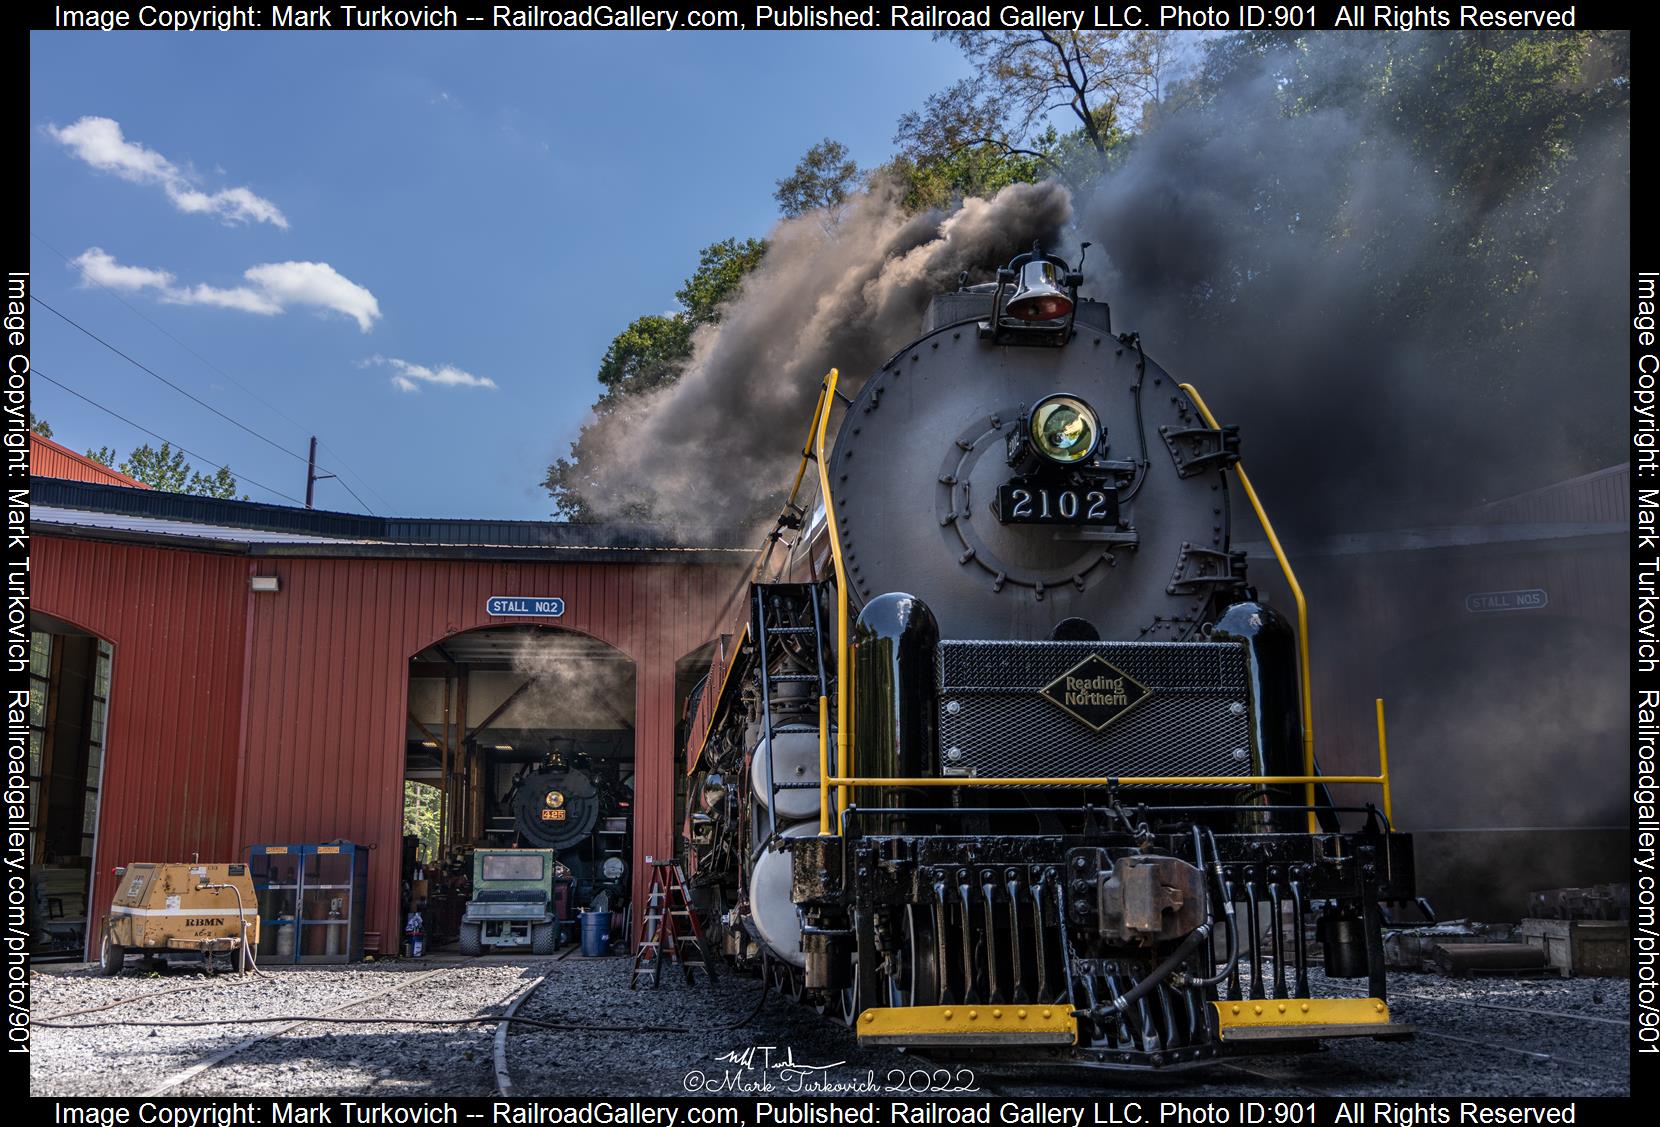 RDG 2102 is a class T-1 and  is pictured in Port Clinton, Pennsylvania, USA.  This was taken along the Reading & Northern Steam Shop on the Reading Company. Photo Copyright: Mark Turkovich uploaded to Railroad Gallery on 03/31/2023. This photograph of RDG 2102 was taken on Thursday, August 11, 2022. All Rights Reserved. 